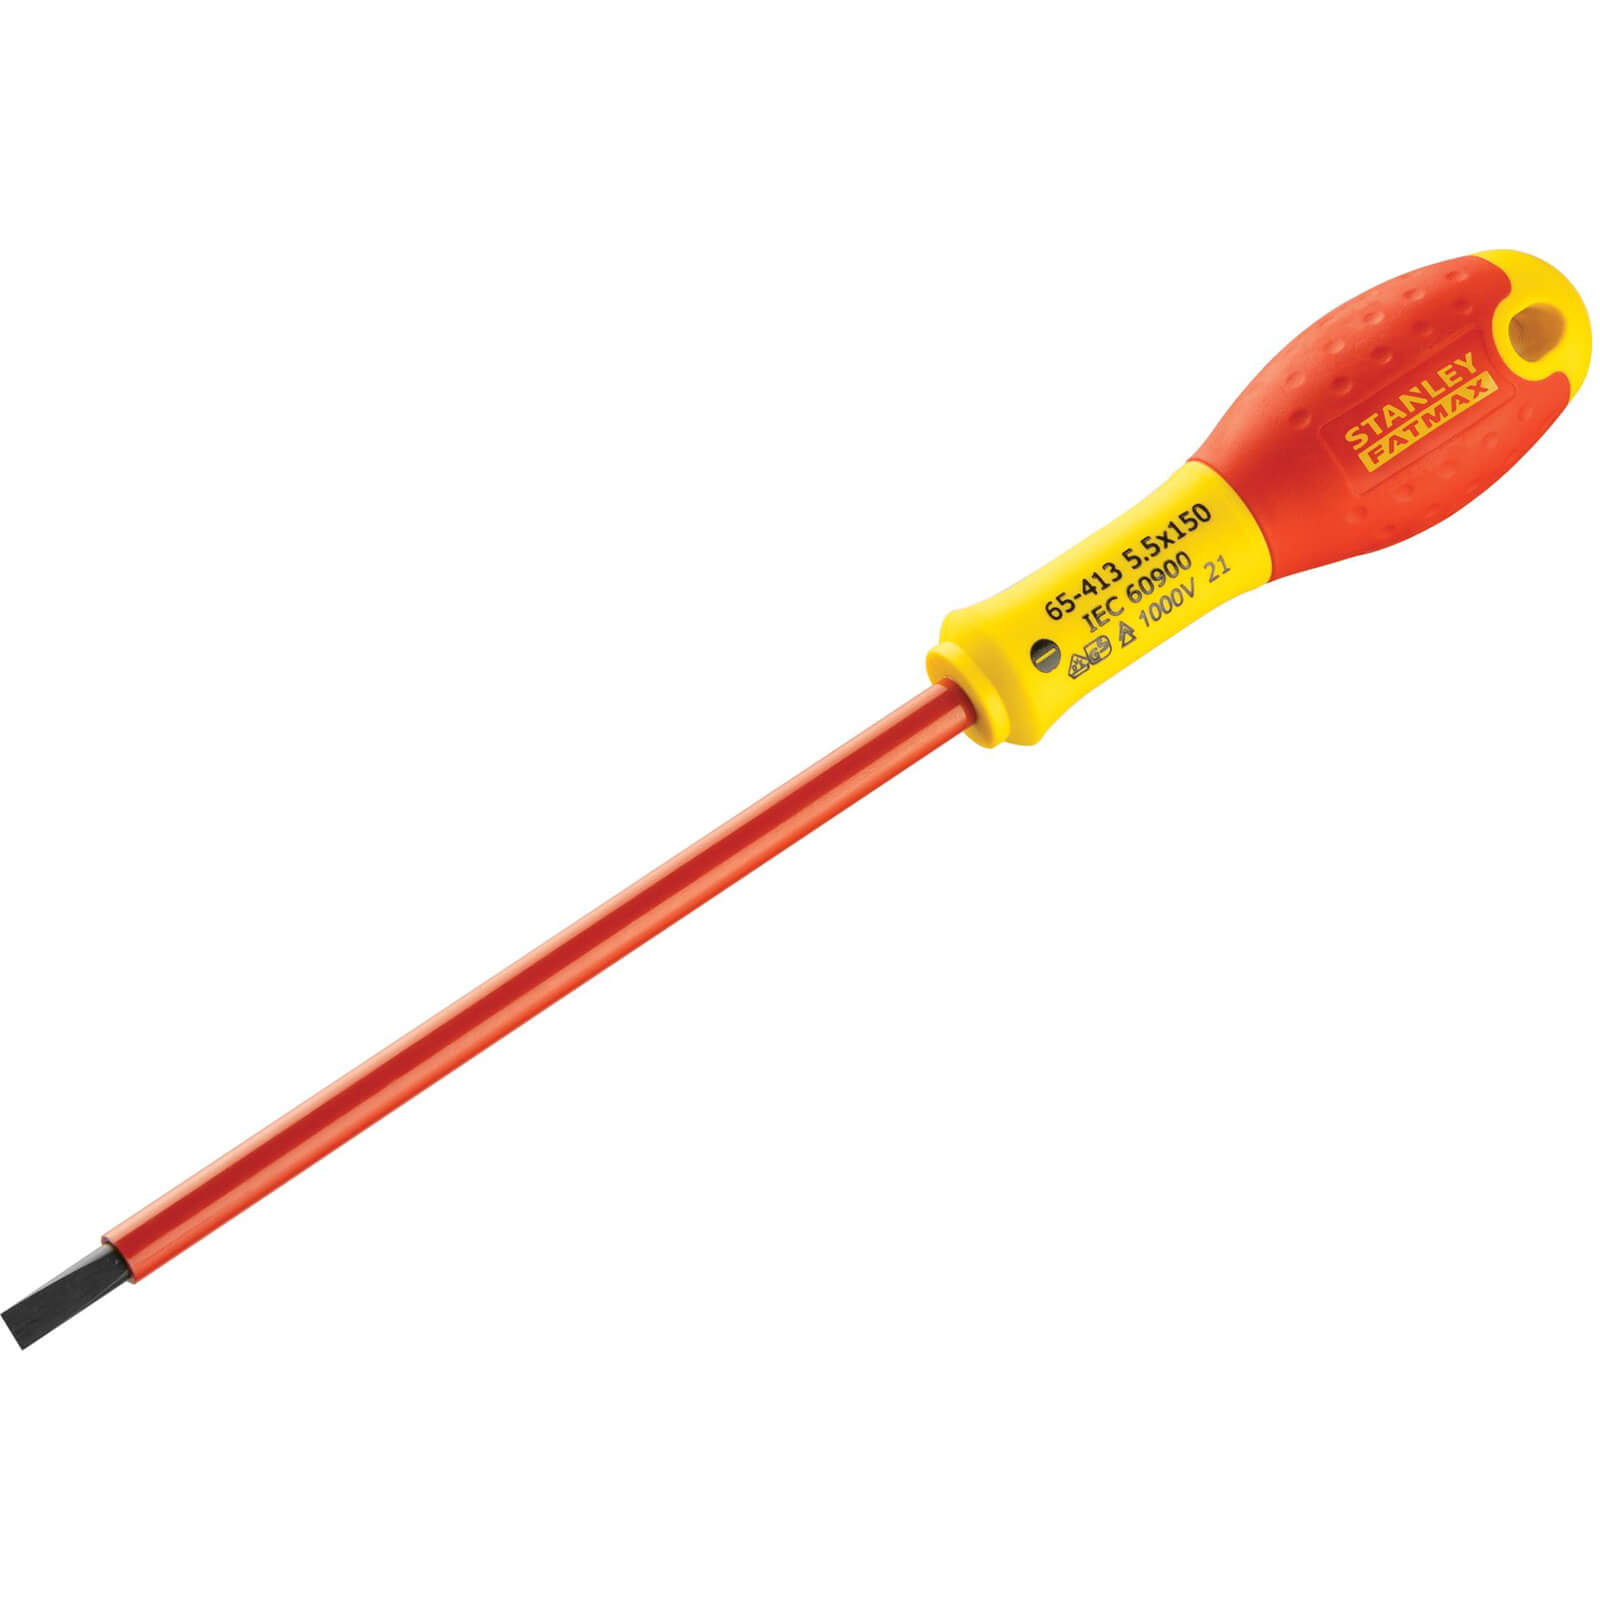 Image of Stanley FatMax Insulated Parallel Slotted Screwdriver 5.5mm 150mm